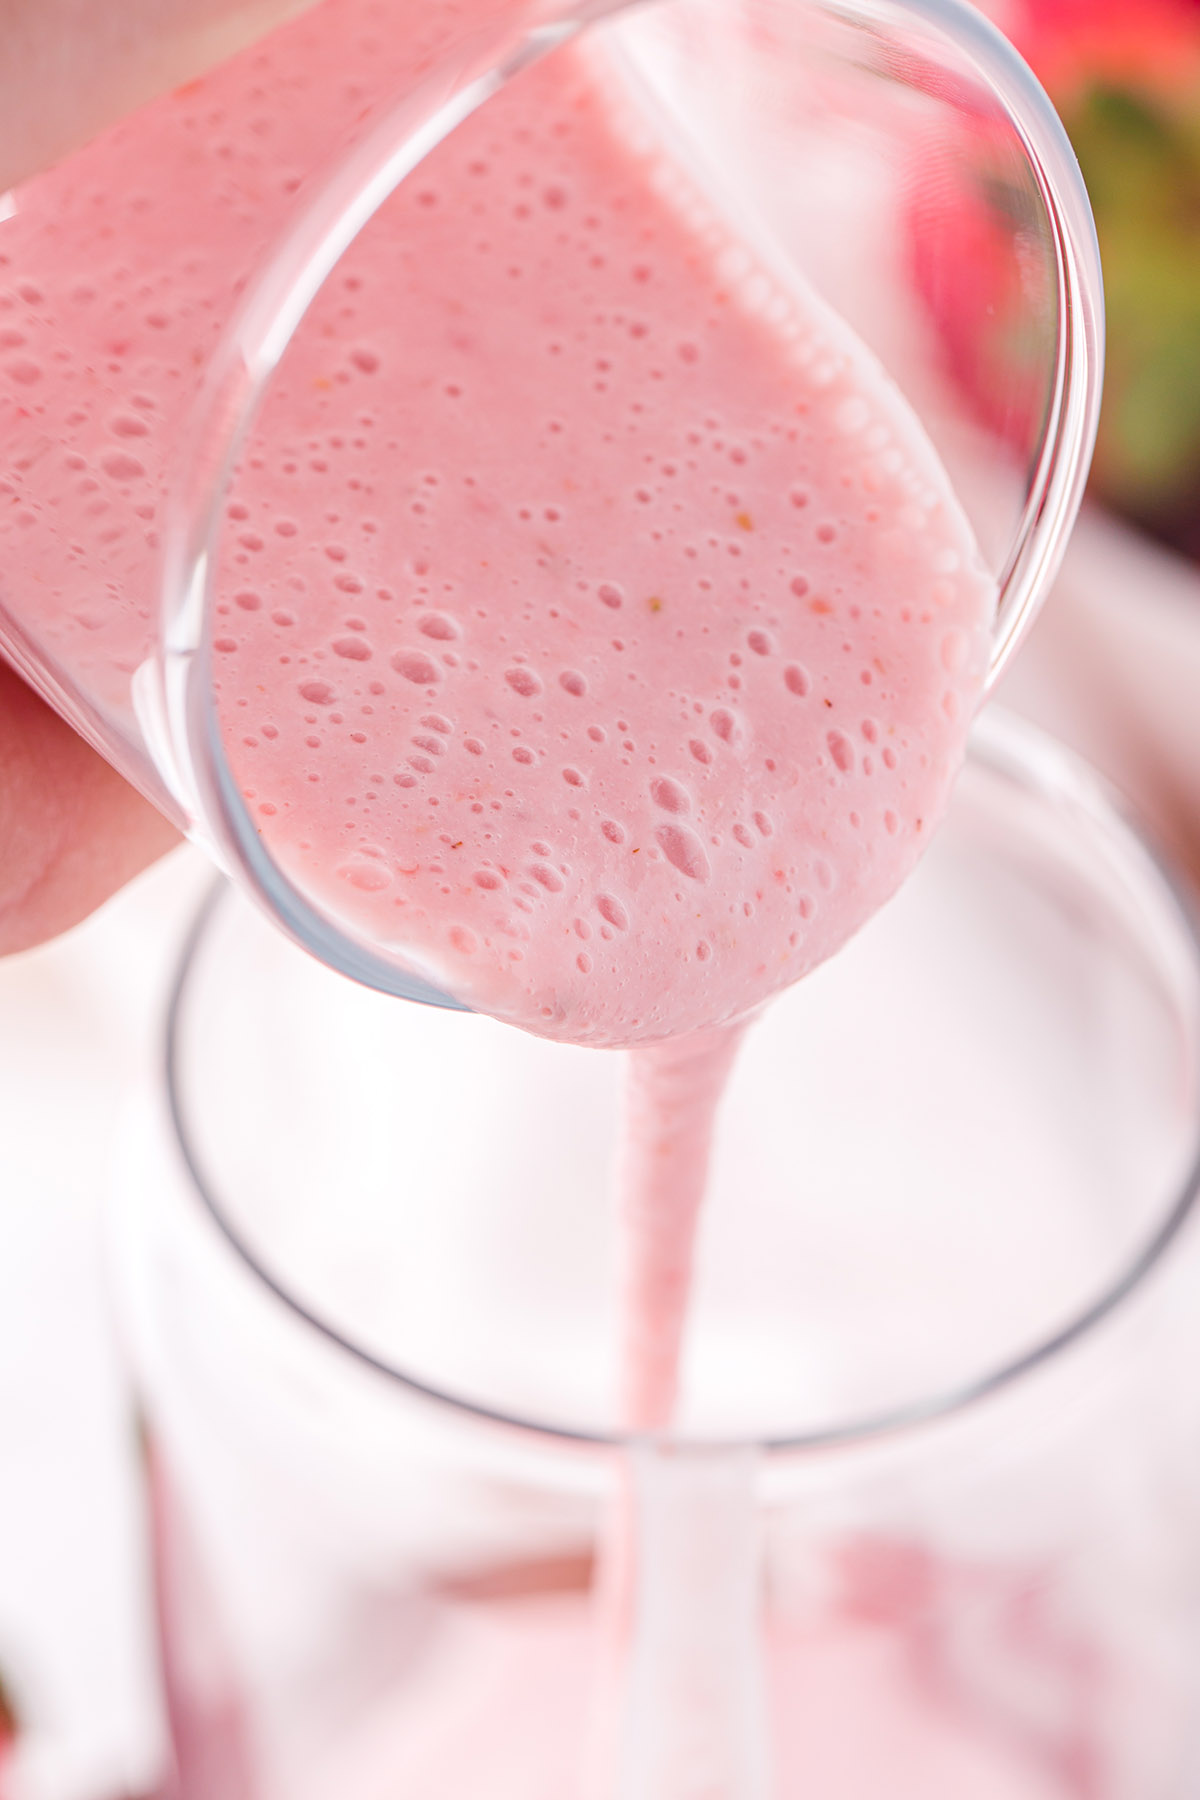 pouring strawberry milk into the glass